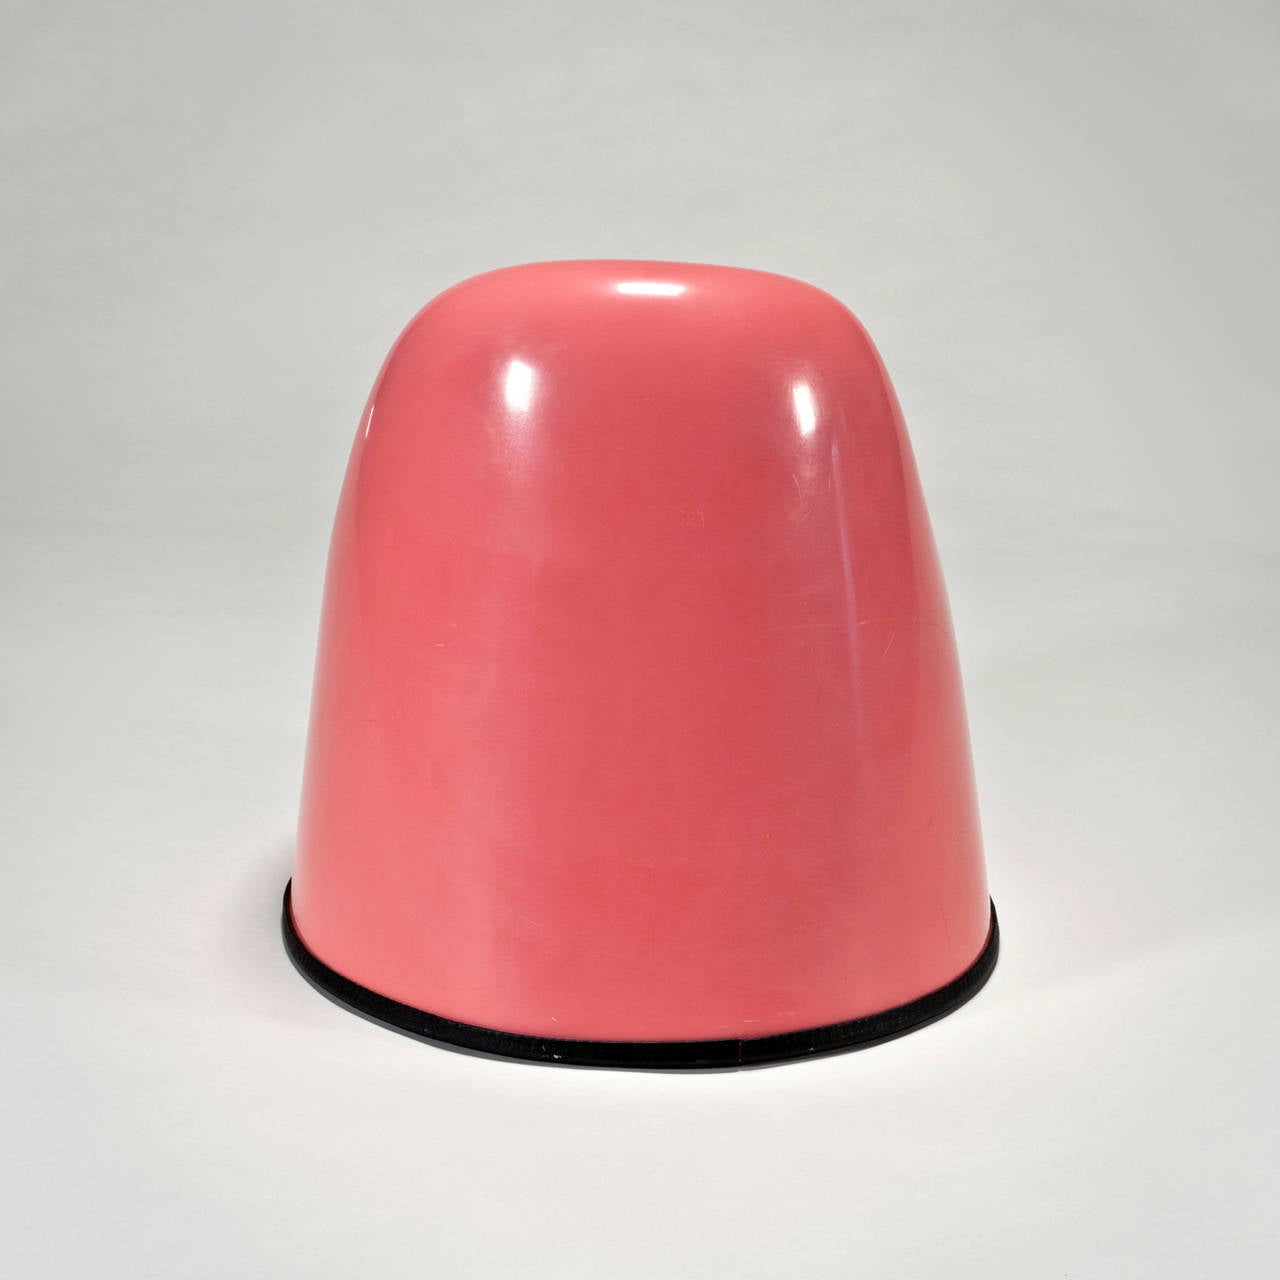 American 1970s Molar Chair, Child's Version, by Wendell Castle